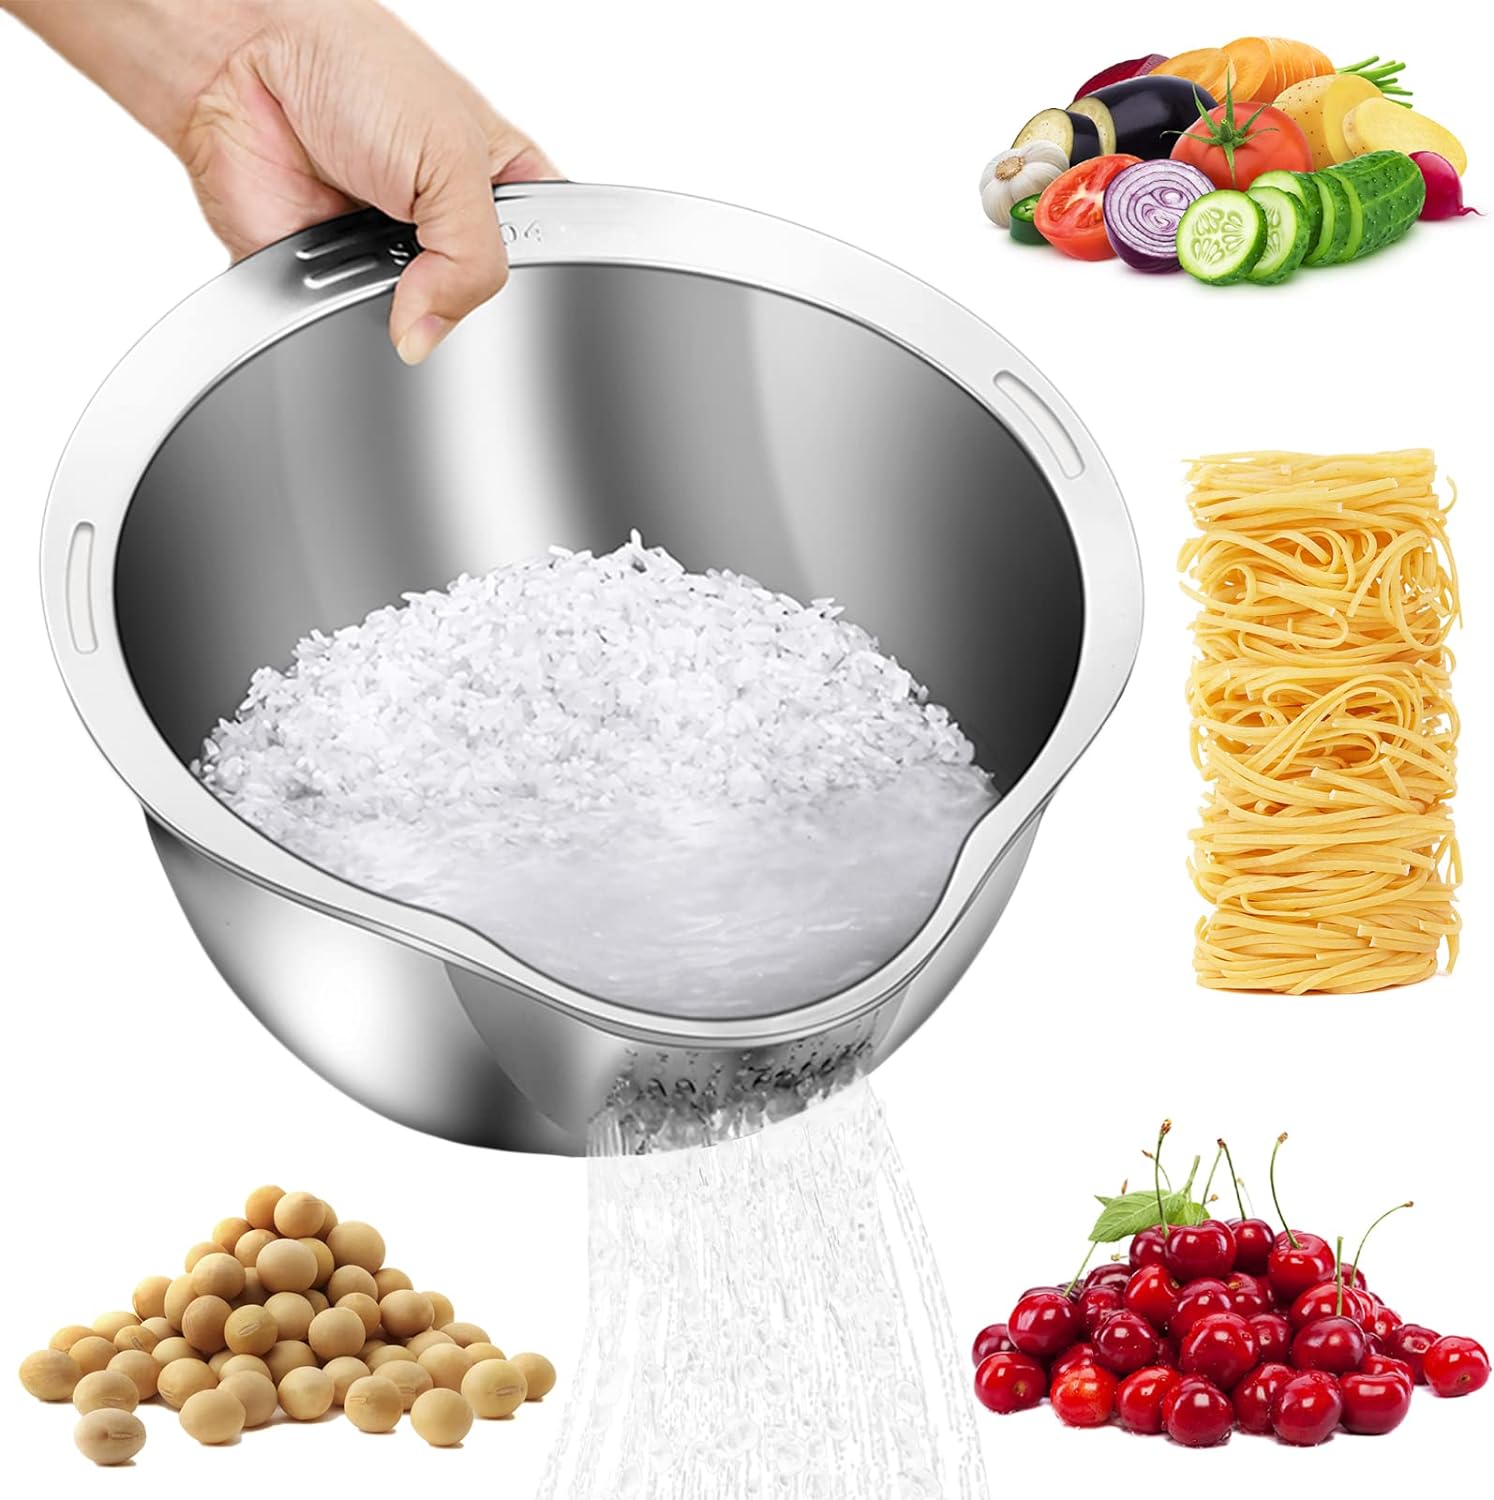 I really like this as a method of cleaning rice, but also use it to clean and soak and drain other things such as vegetables, fruit and frozen items such a shrimp. I don't like items made of plastic so I like that it is metal and very light and easy to clean.